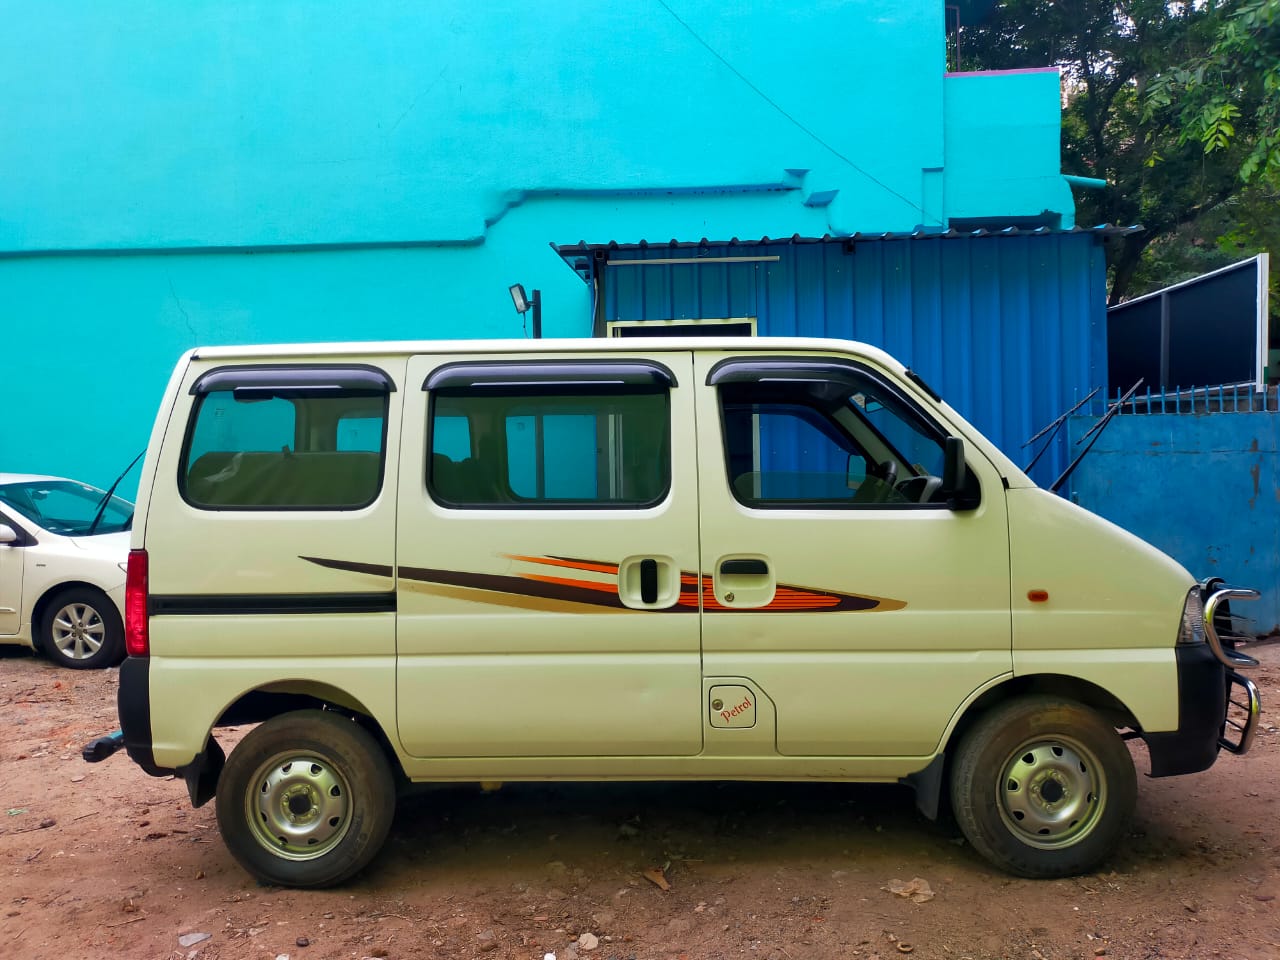 714-for-sale-Maruthi-Suzuki-Eeco-Petrol-First-Owner-2018-PY-registered-rs-410000